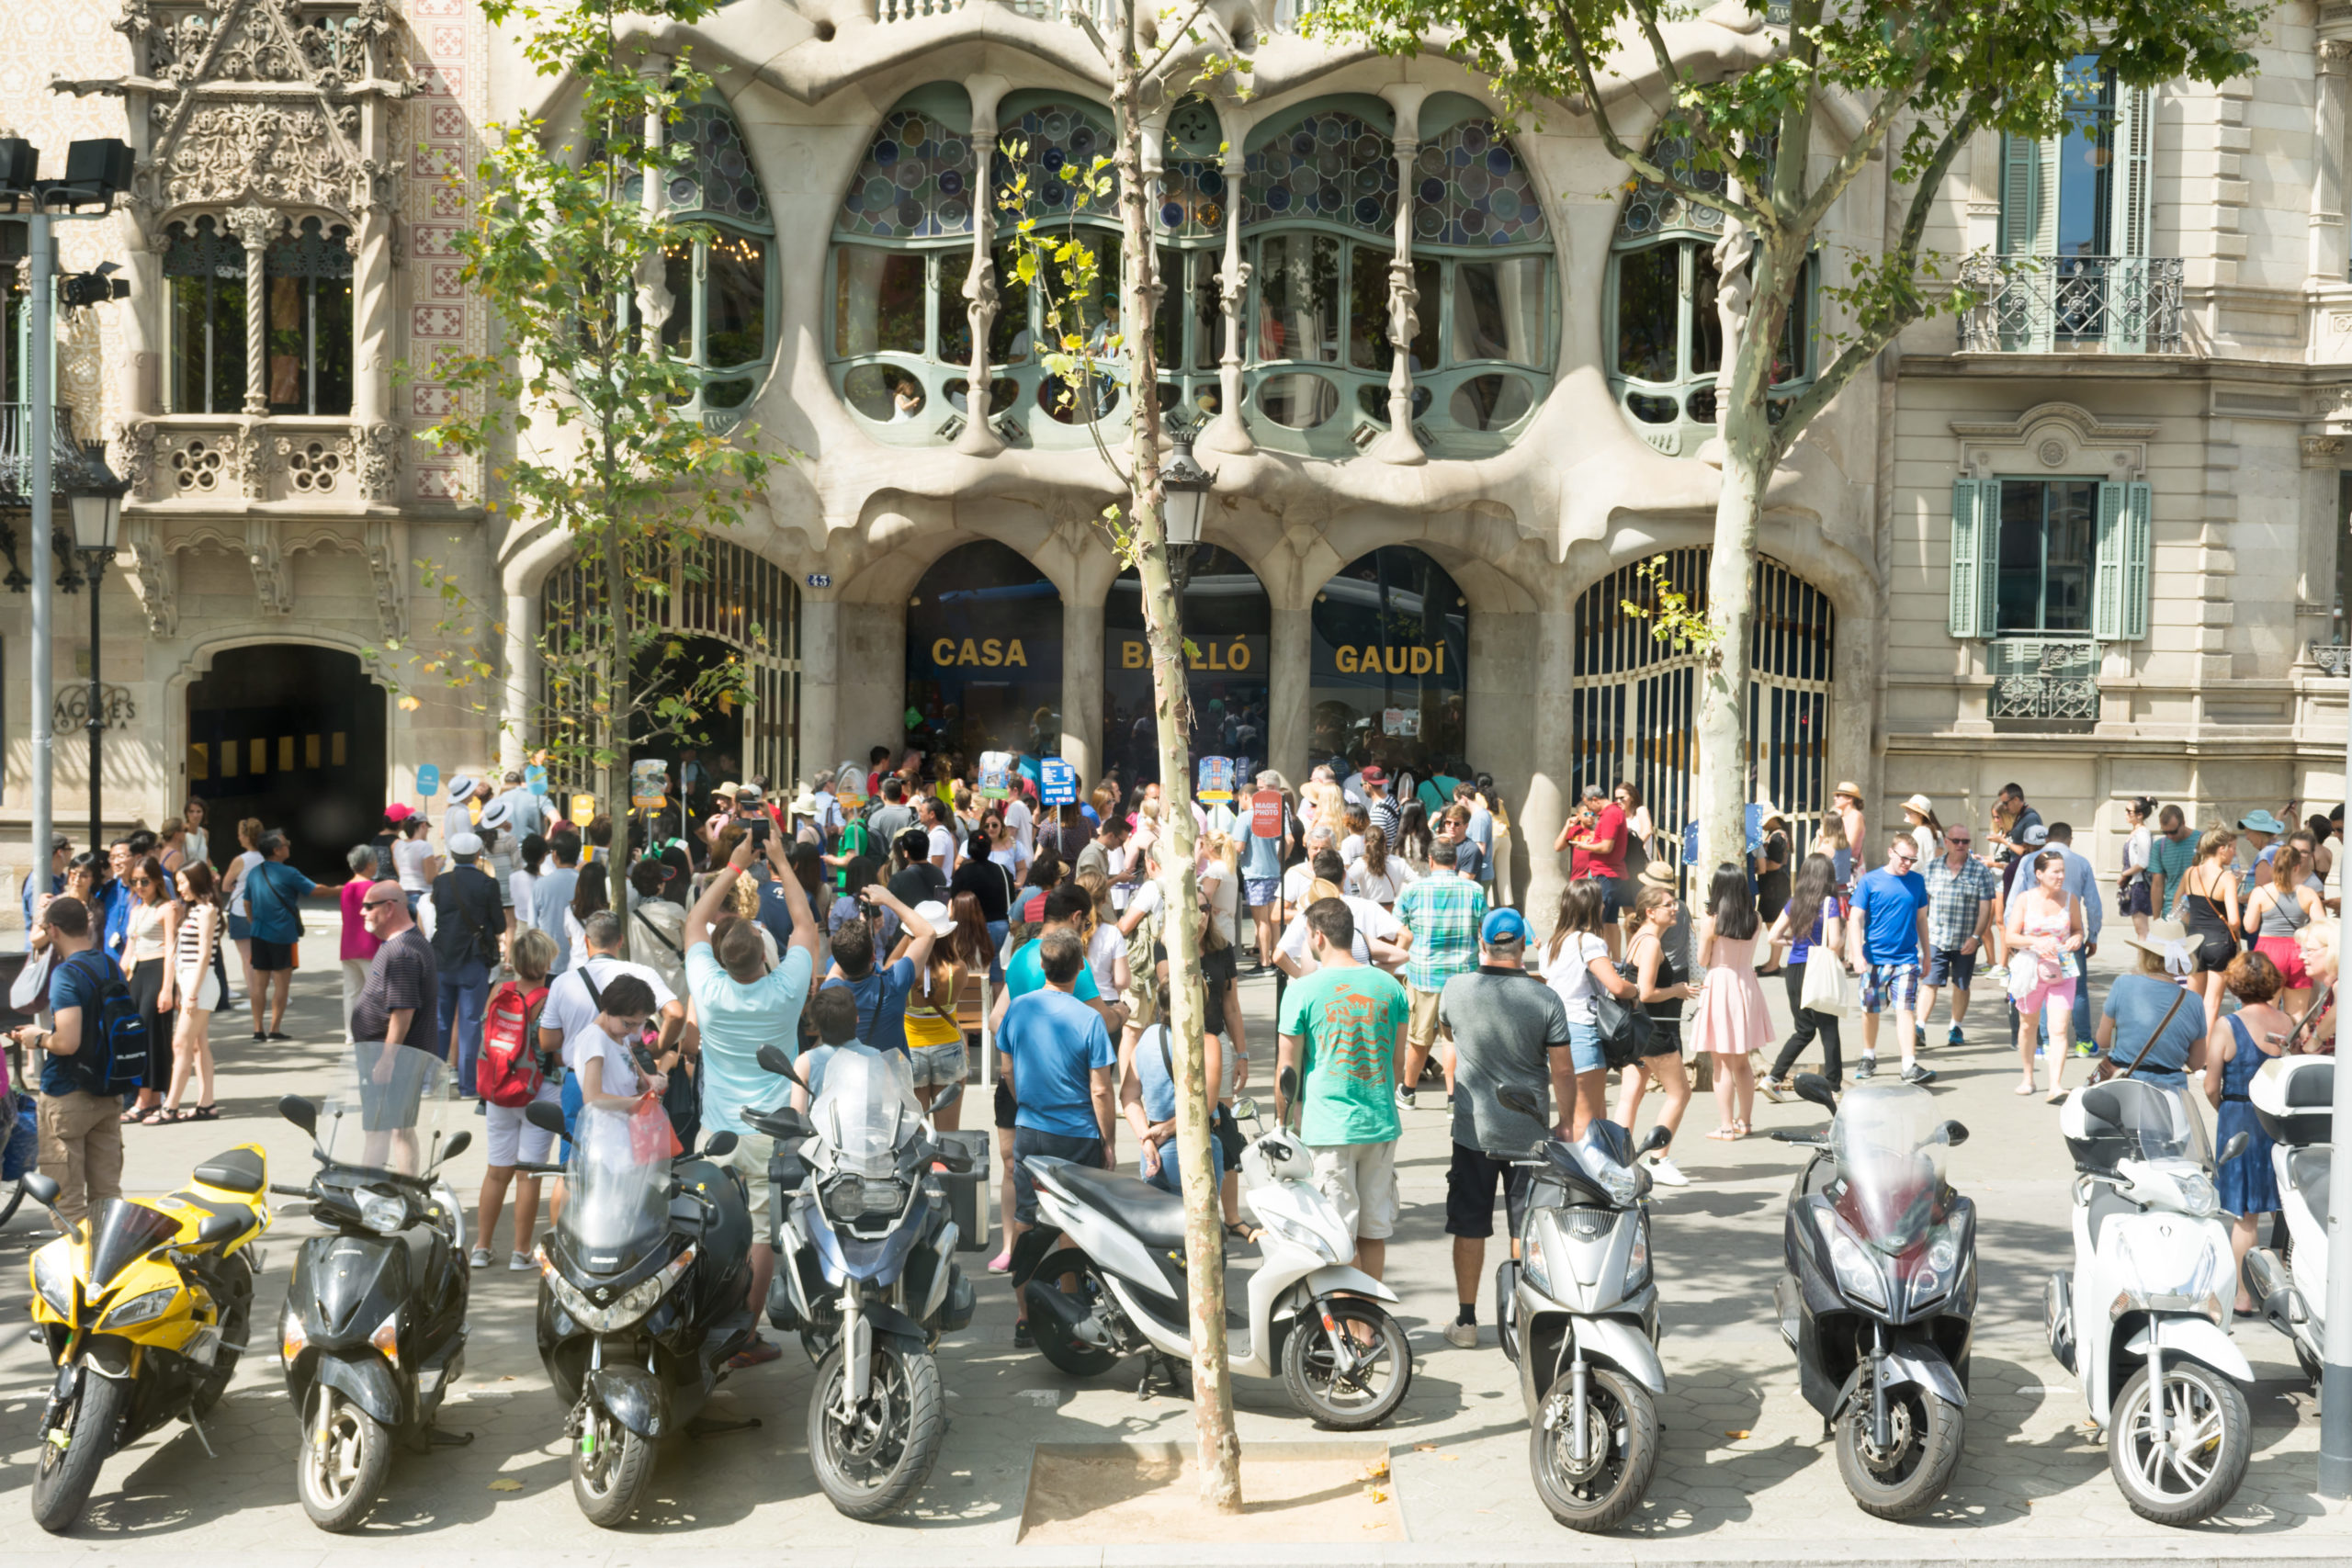 Sensors to analyze the flow of people in real time, a winning proposal for the challenge to move towards sustainable tourism in the Eixample